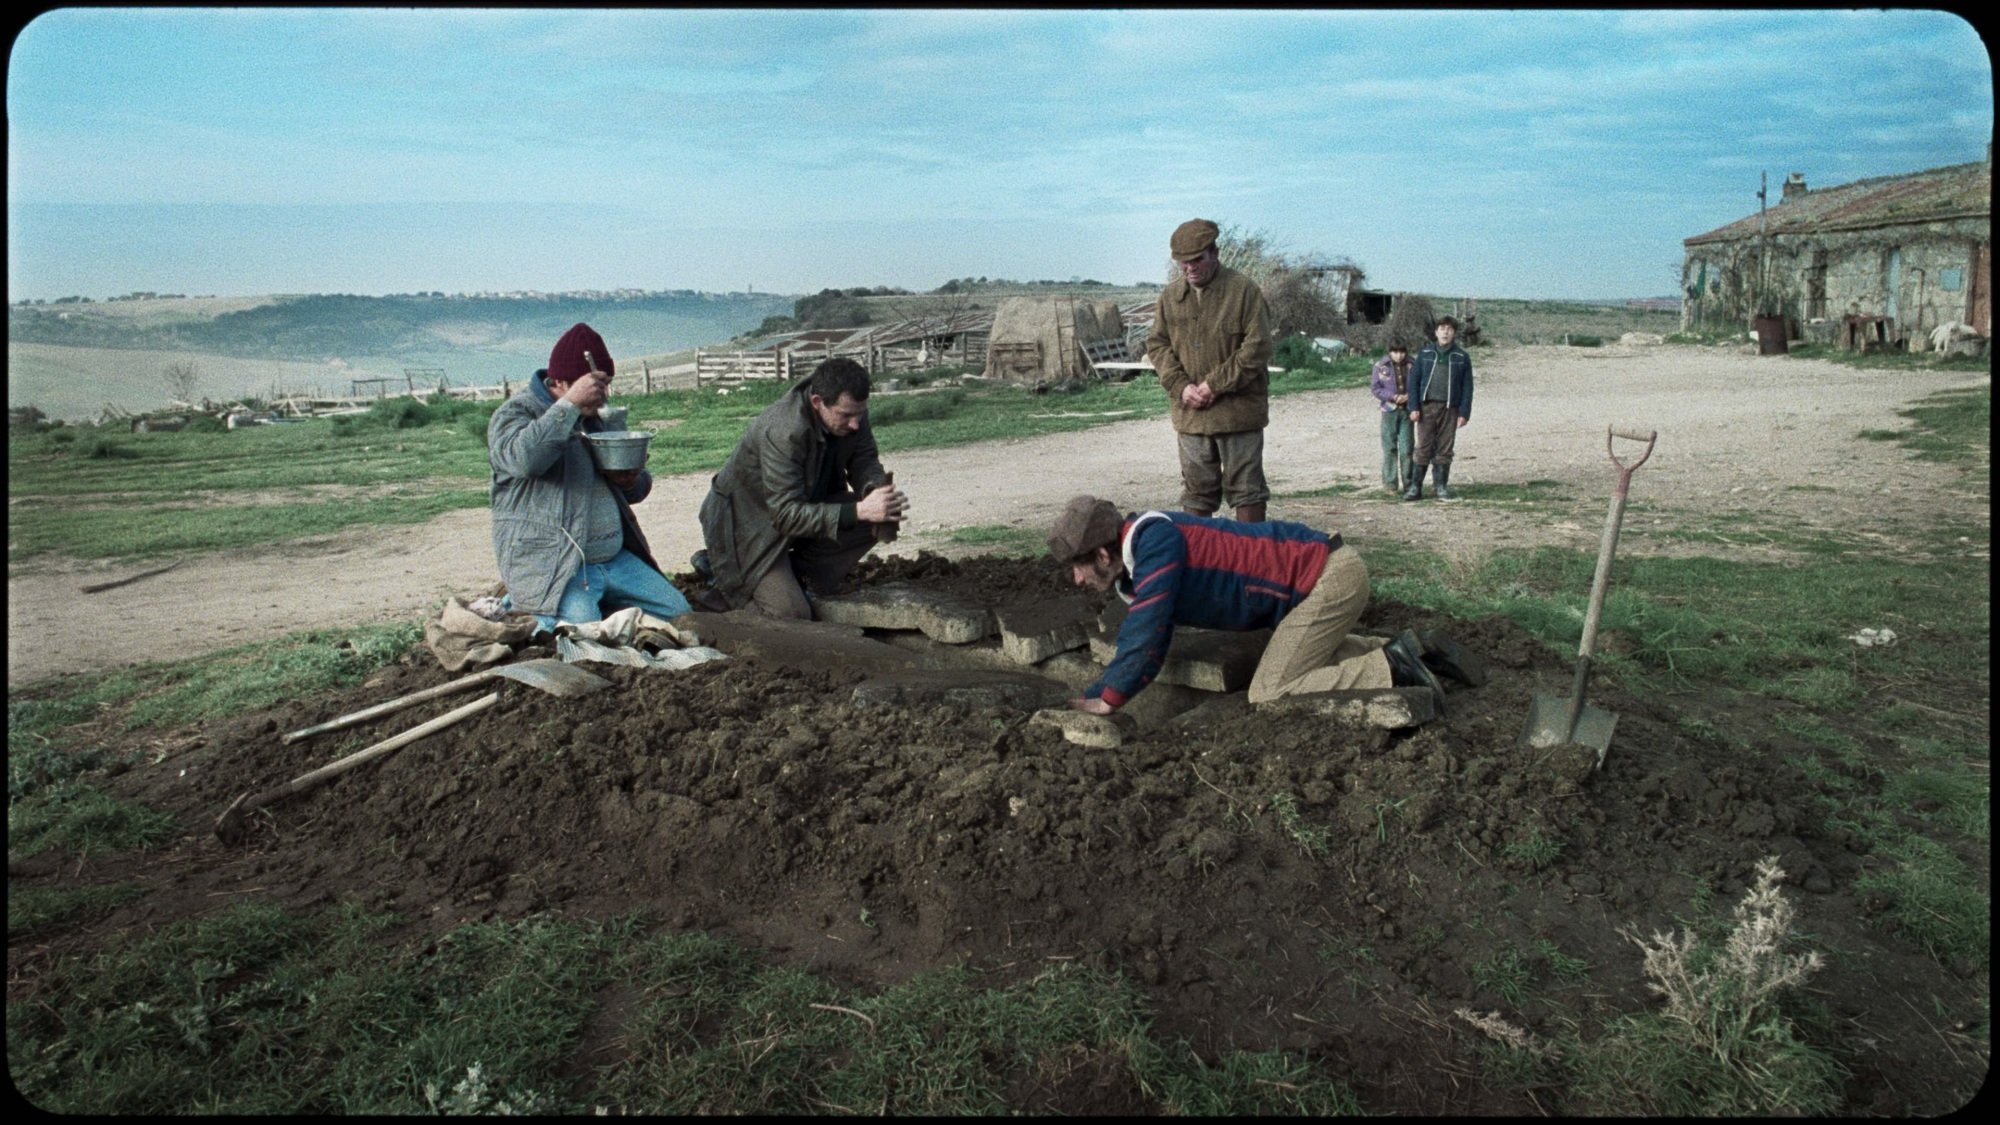 Three tomb raiders dig up a tomb along a small dirt path.